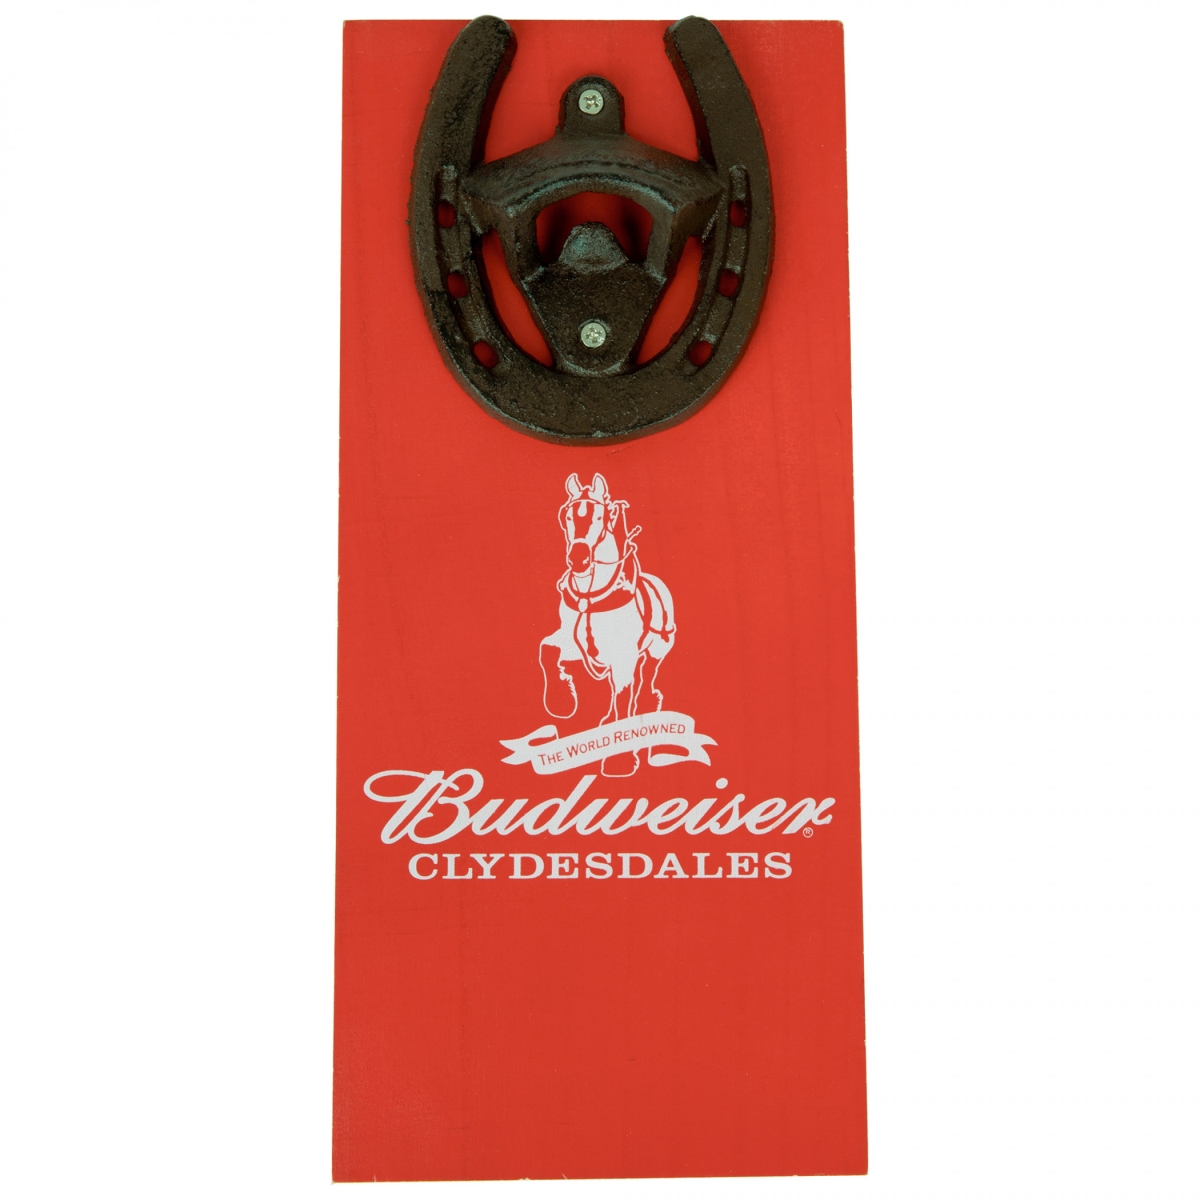 Picture of Budweiser 851538 Clydesdales Horseshoe Bottle Opener